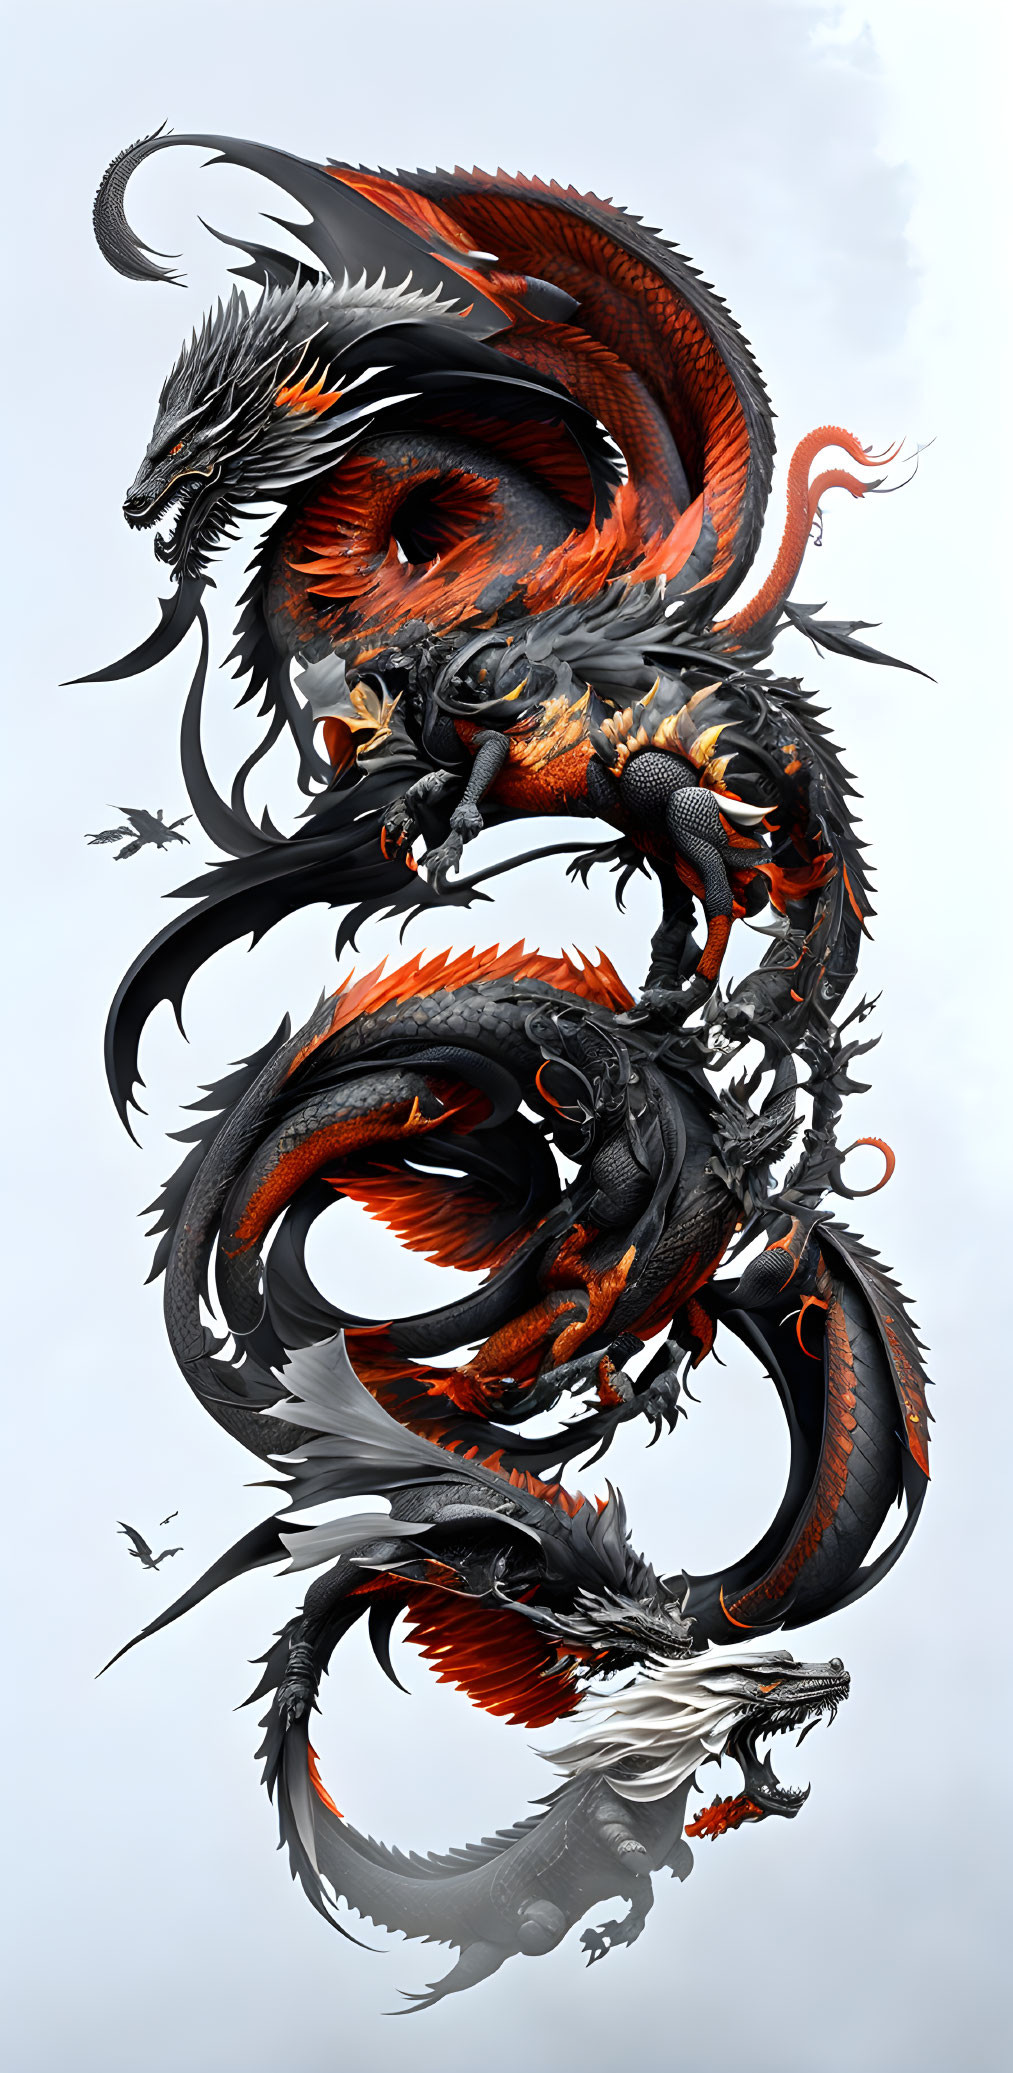 Three Orange and Black Dragons in Dramatic Pose on Light Background